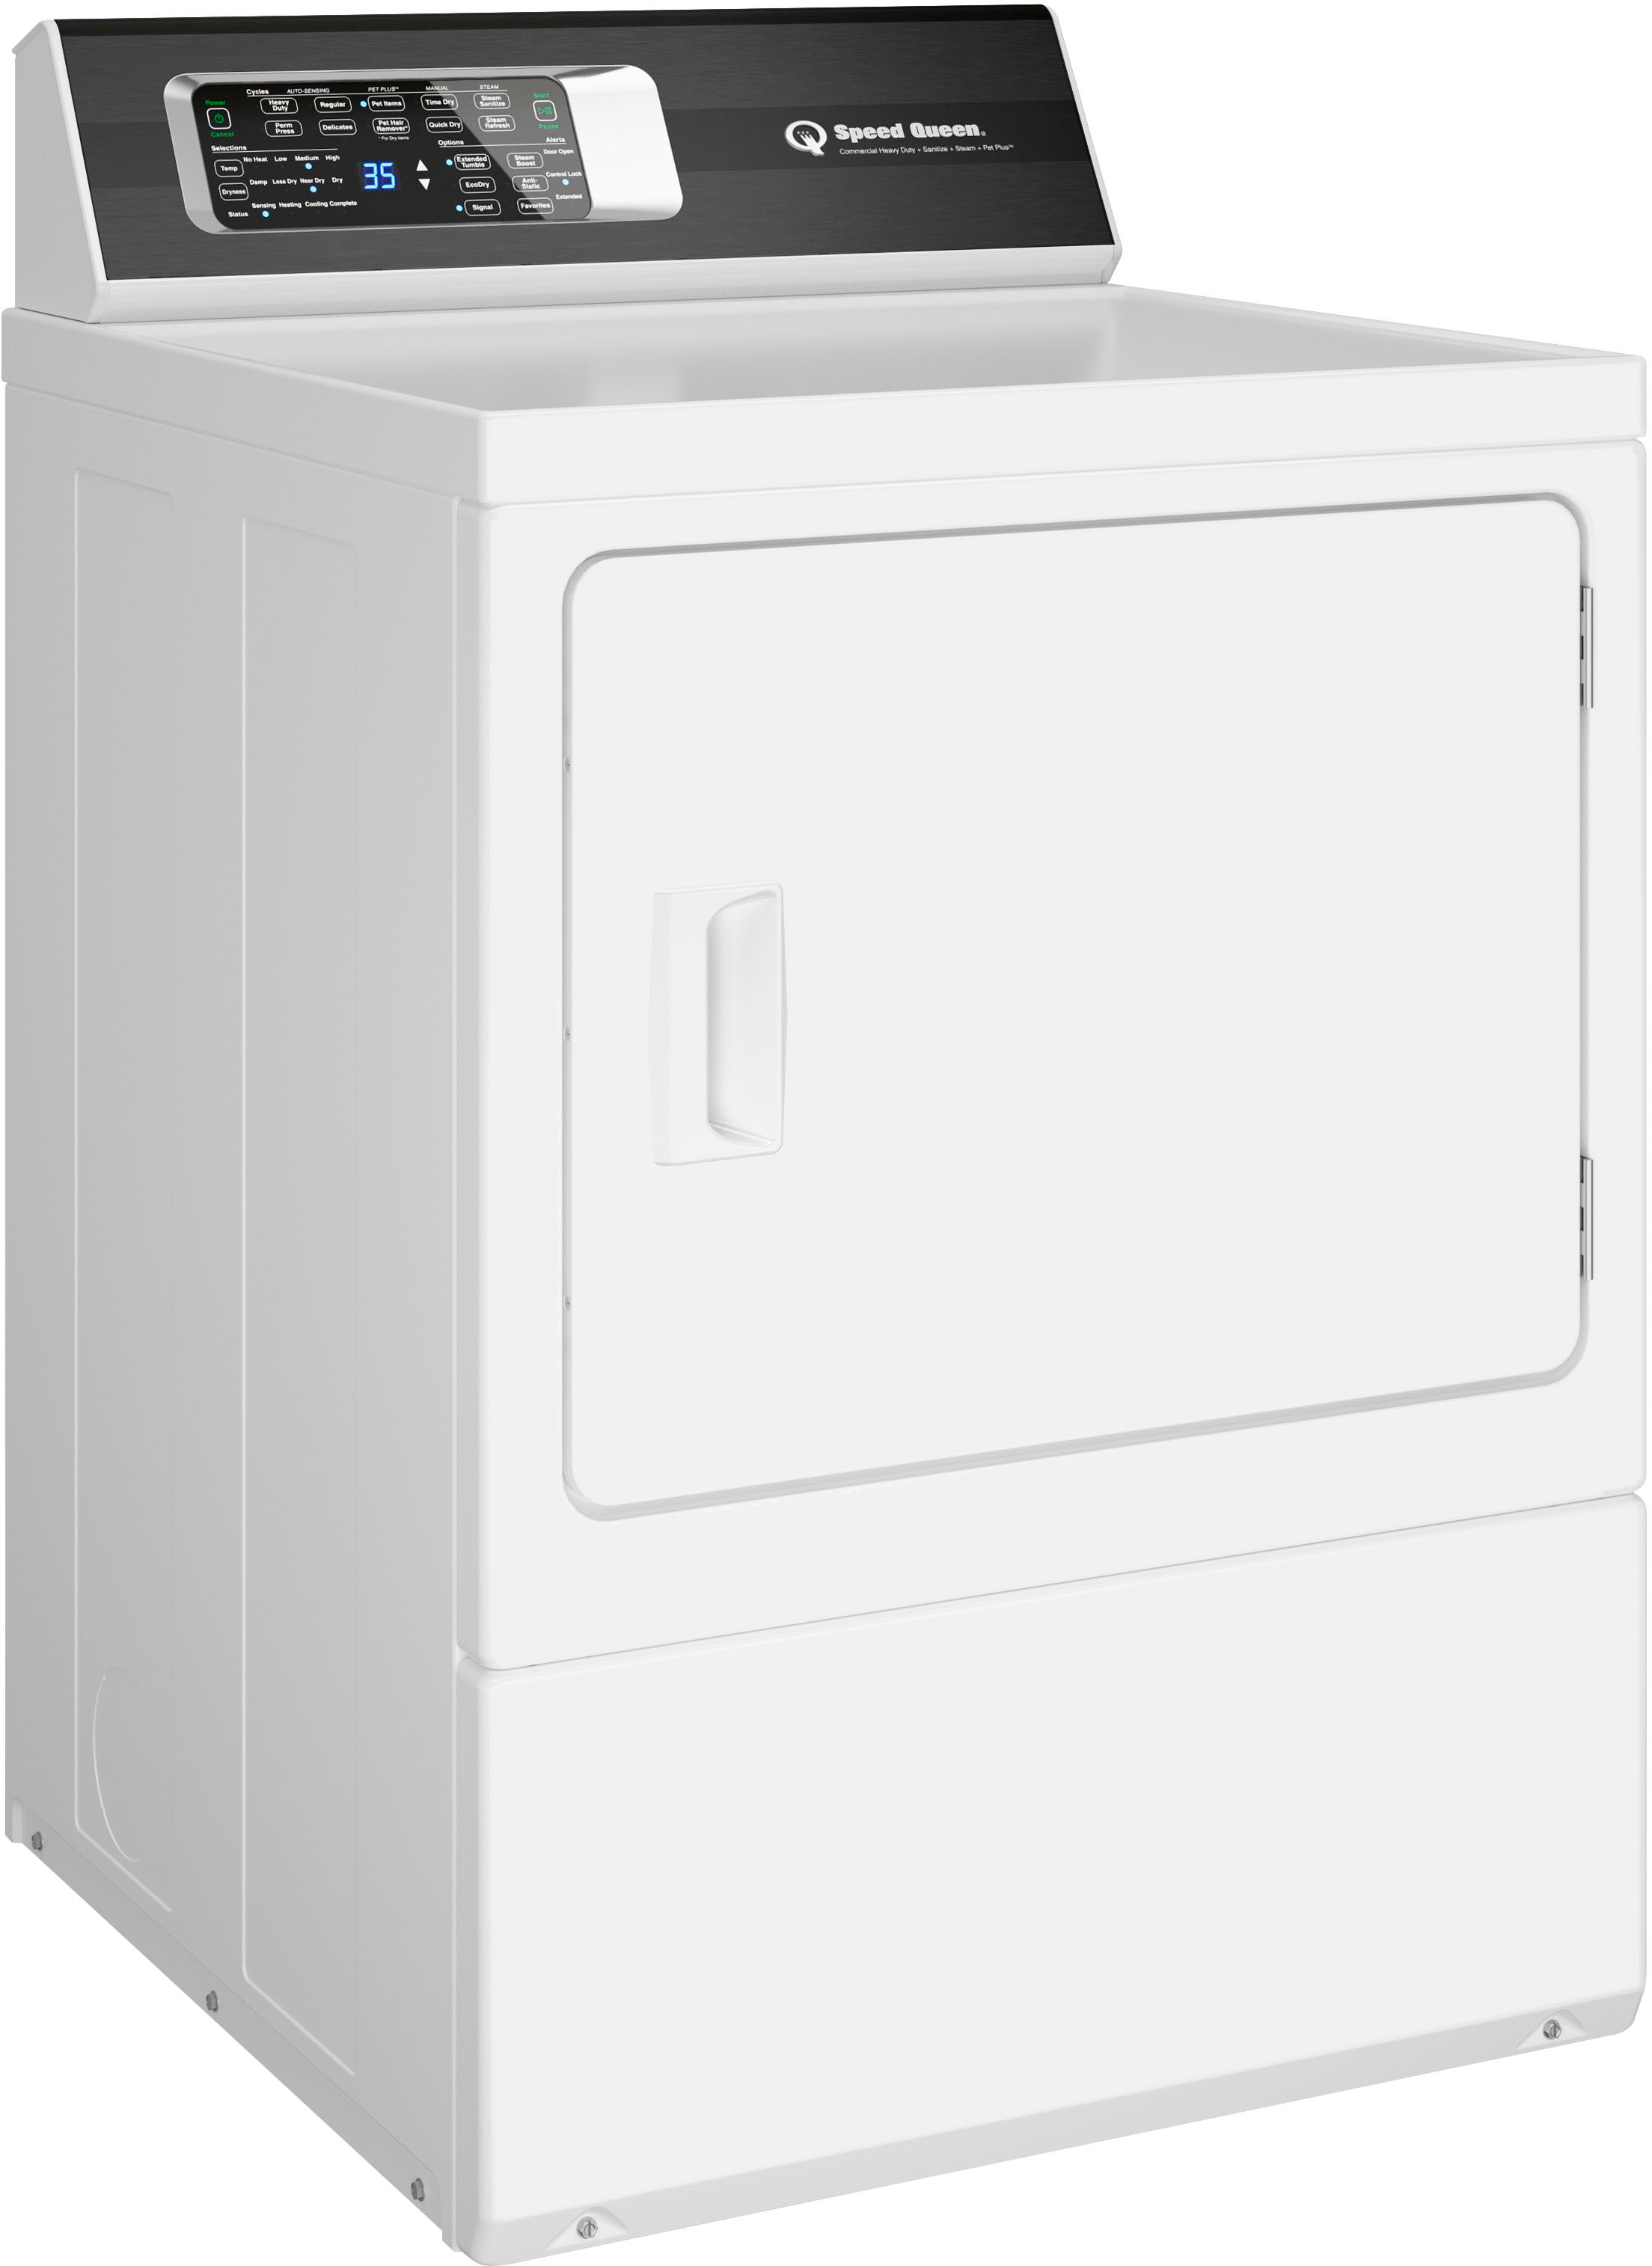 Left View: Speed Queen - DR7 PET FRIENDLY SANITIZING GAS DRYER - White